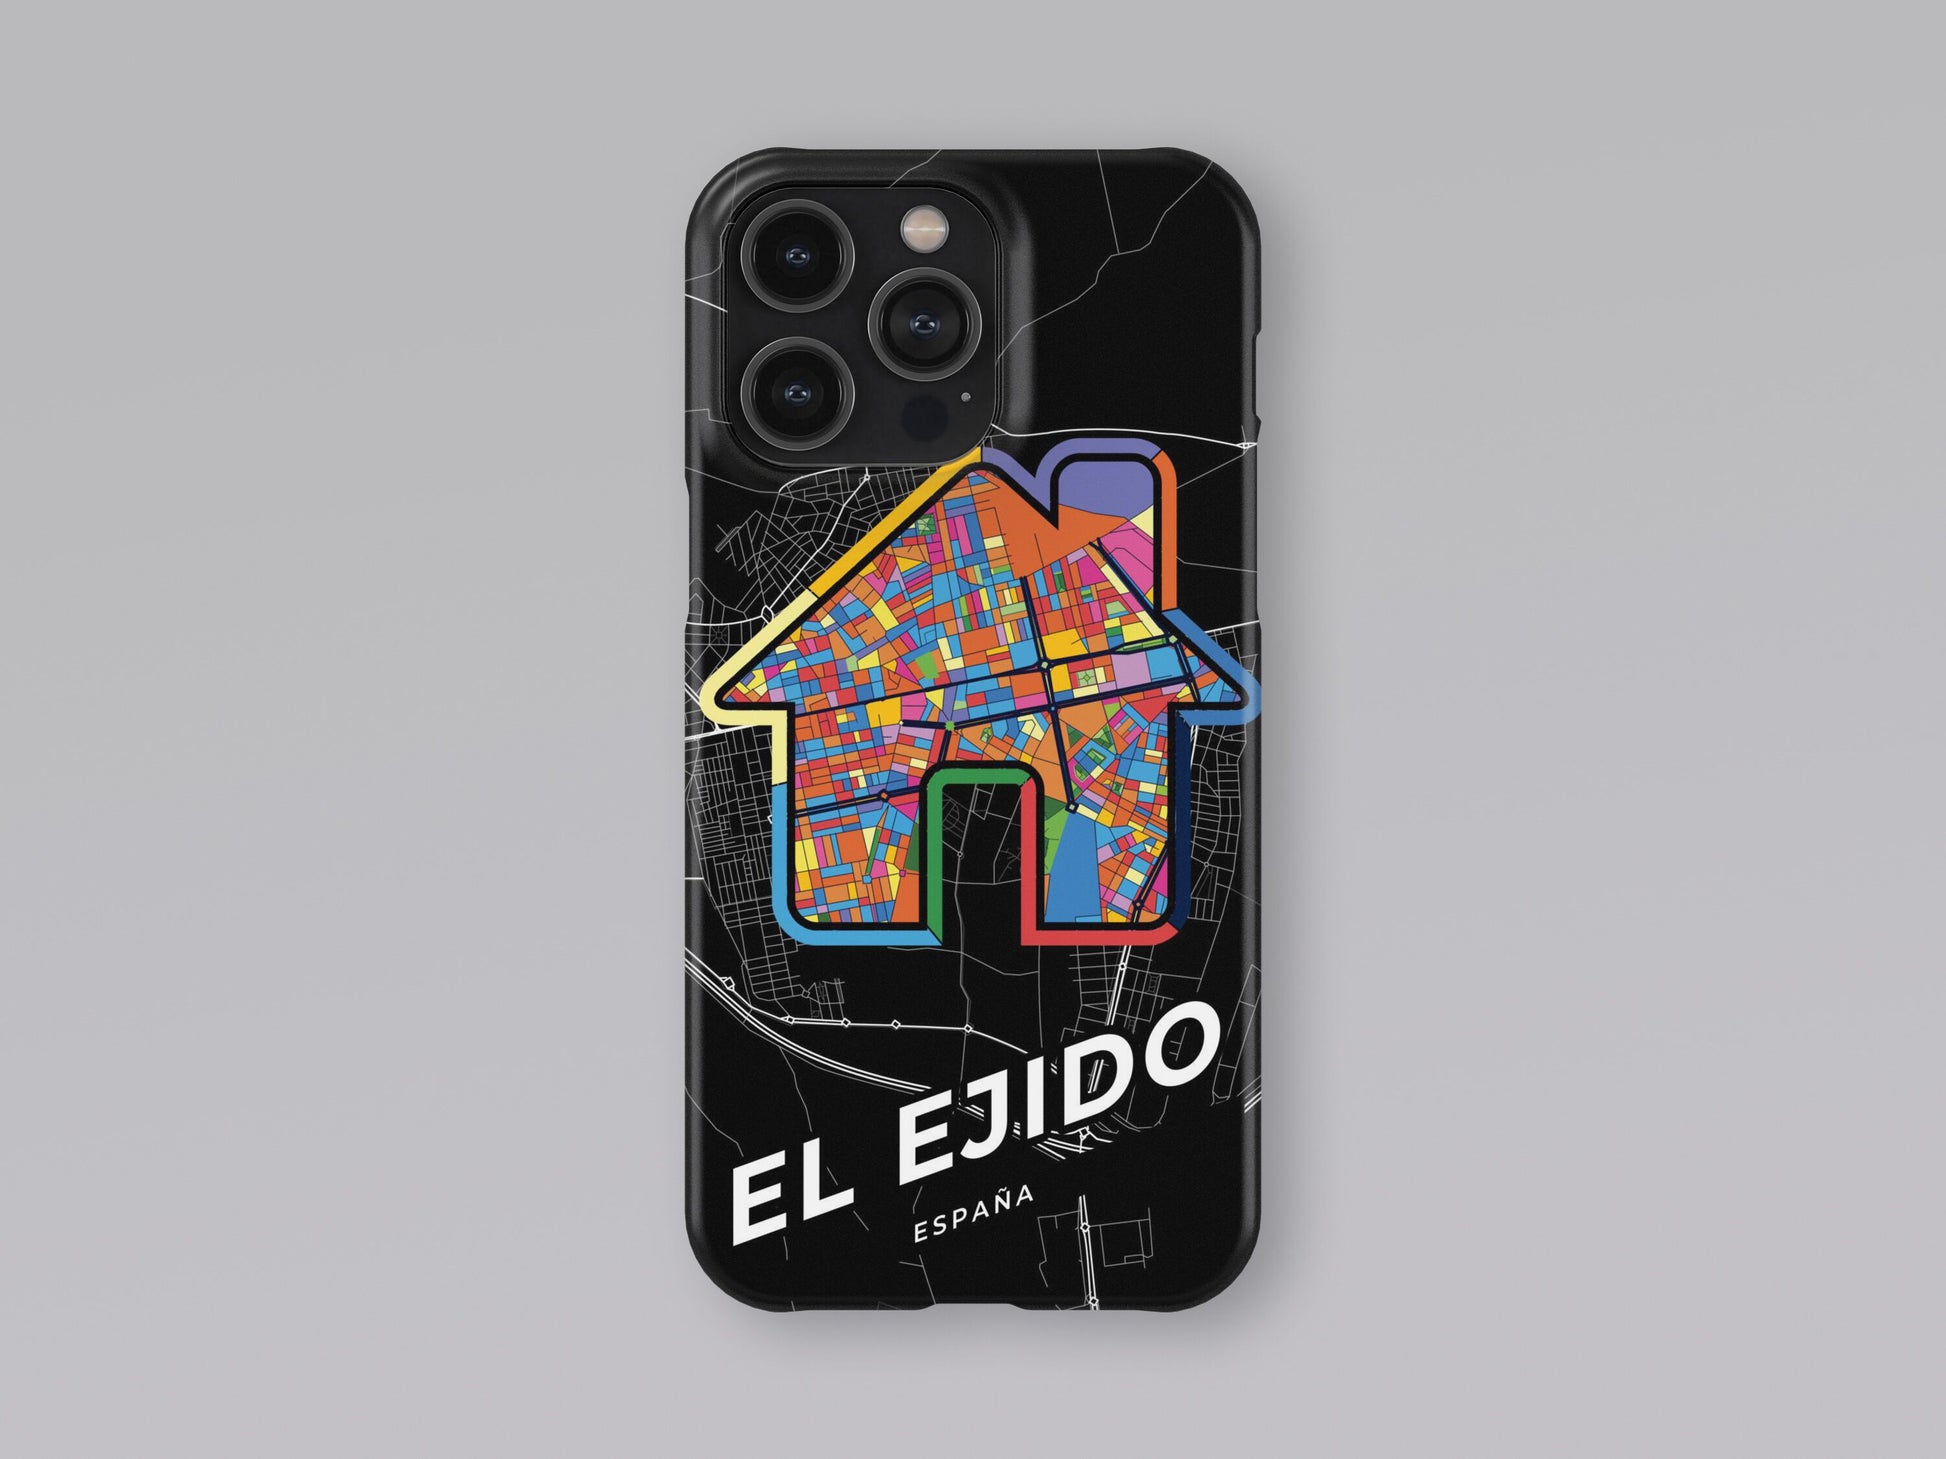 El Ejido Spain slim phone case with colorful icon. Birthday, wedding or housewarming gift. Couple match cases. 3